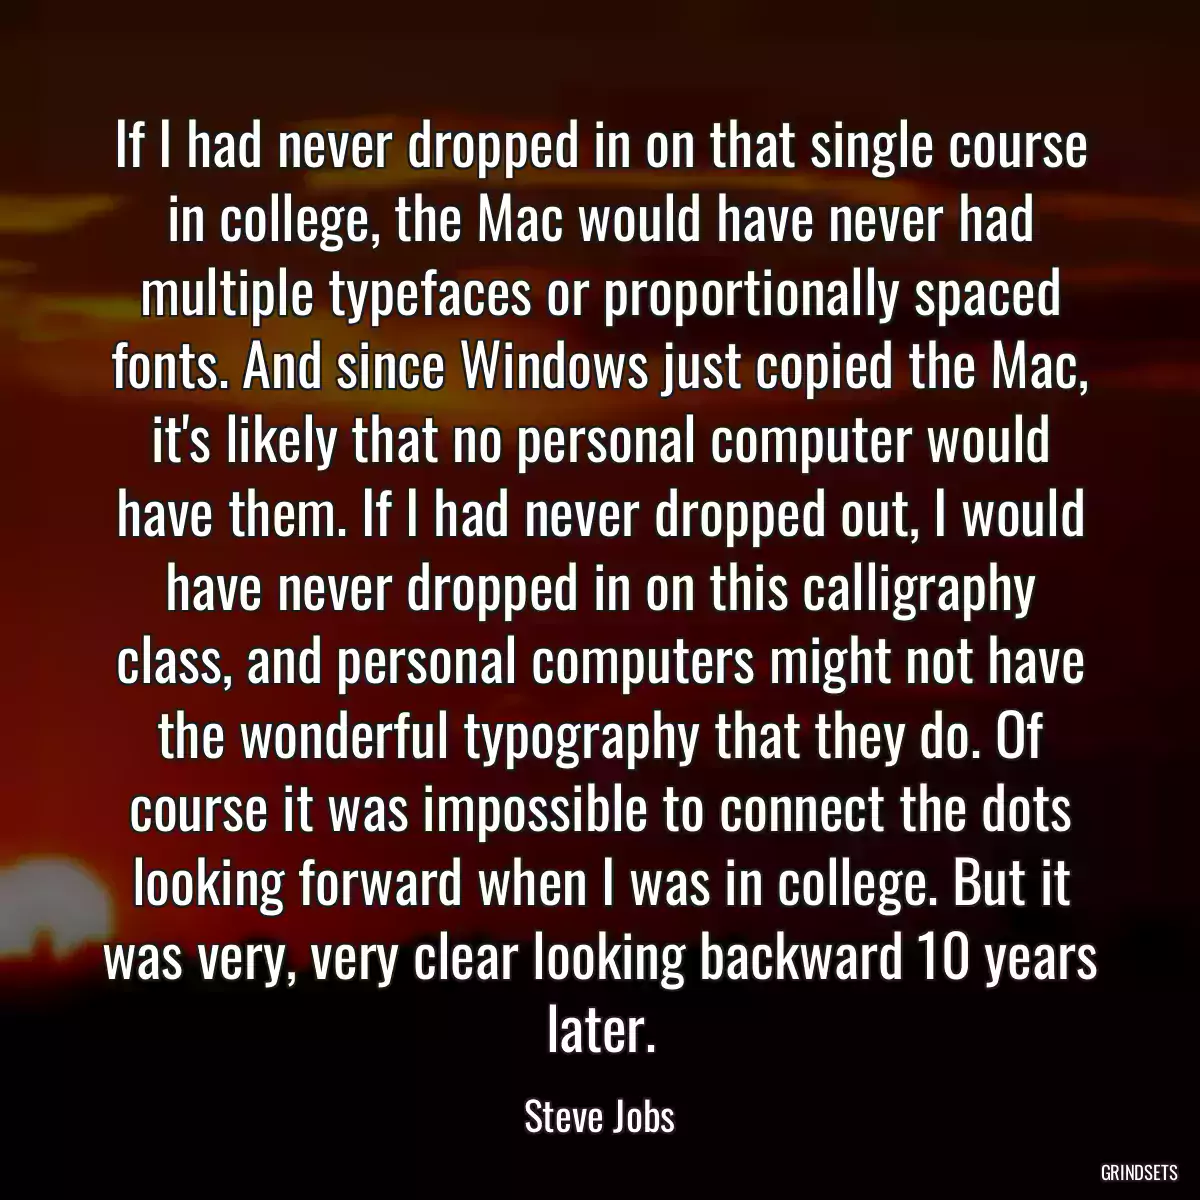 If I had never dropped in on that single course in college, the Mac would have never had multiple typefaces or proportionally spaced fonts. And since Windows just copied the Mac, it\'s likely that no personal computer would have them. If I had never dropped out, I would have never dropped in on this calligraphy class, and personal computers might not have the wonderful typography that they do. Of course it was impossible to connect the dots looking forward when I was in college. But it was very, very clear looking backward 10 years later.